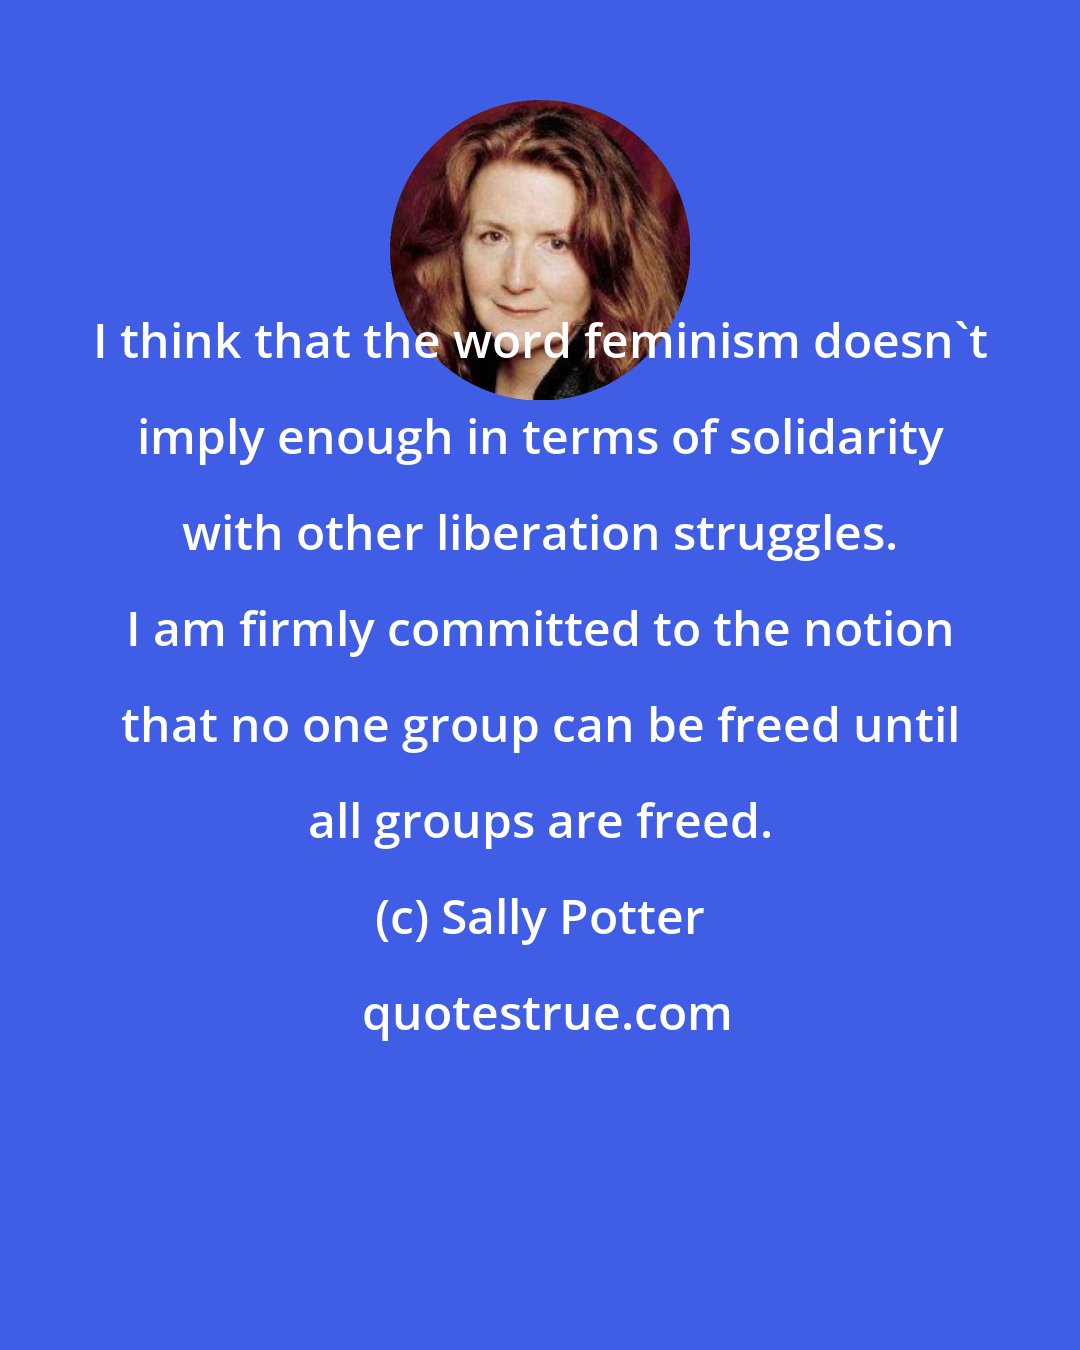 Sally Potter: I think that the word feminism doesn't imply enough in terms of solidarity with other liberation struggles. I am firmly committed to the notion that no one group can be freed until all groups are freed.